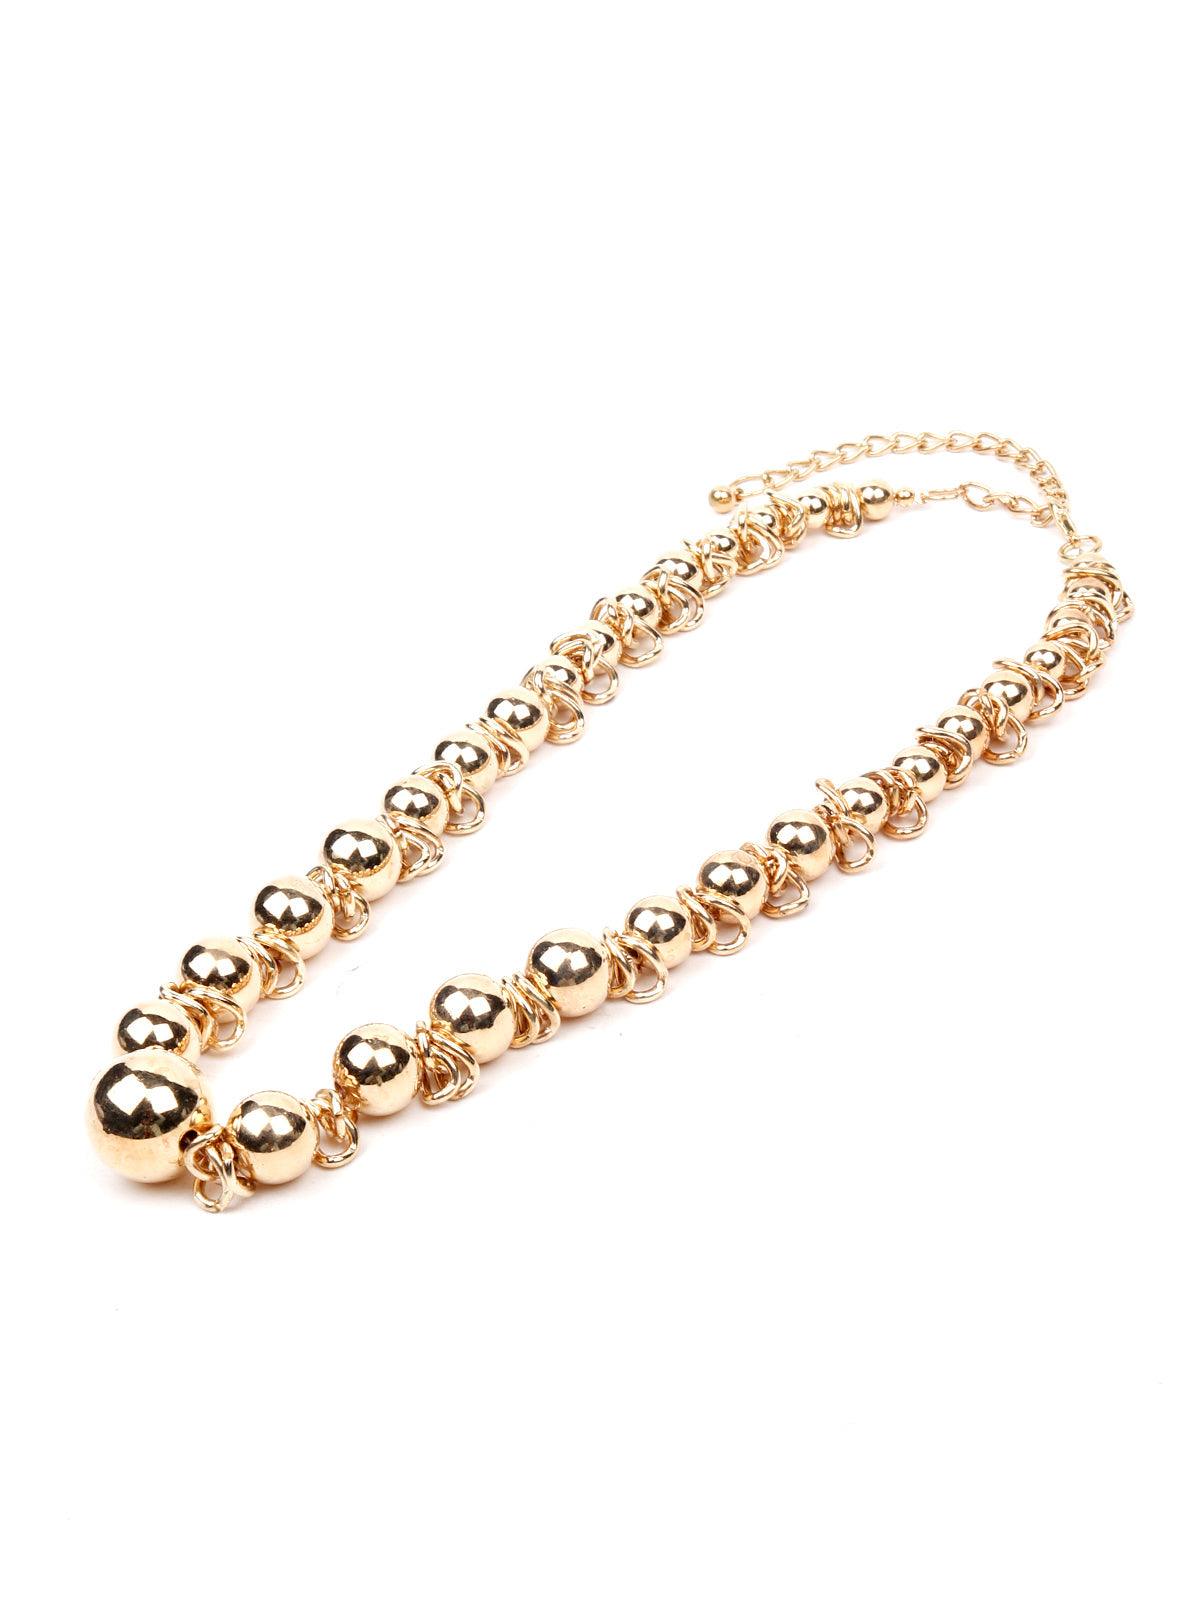 Women's Gold Classic Rounded Statement Necklace - Odette